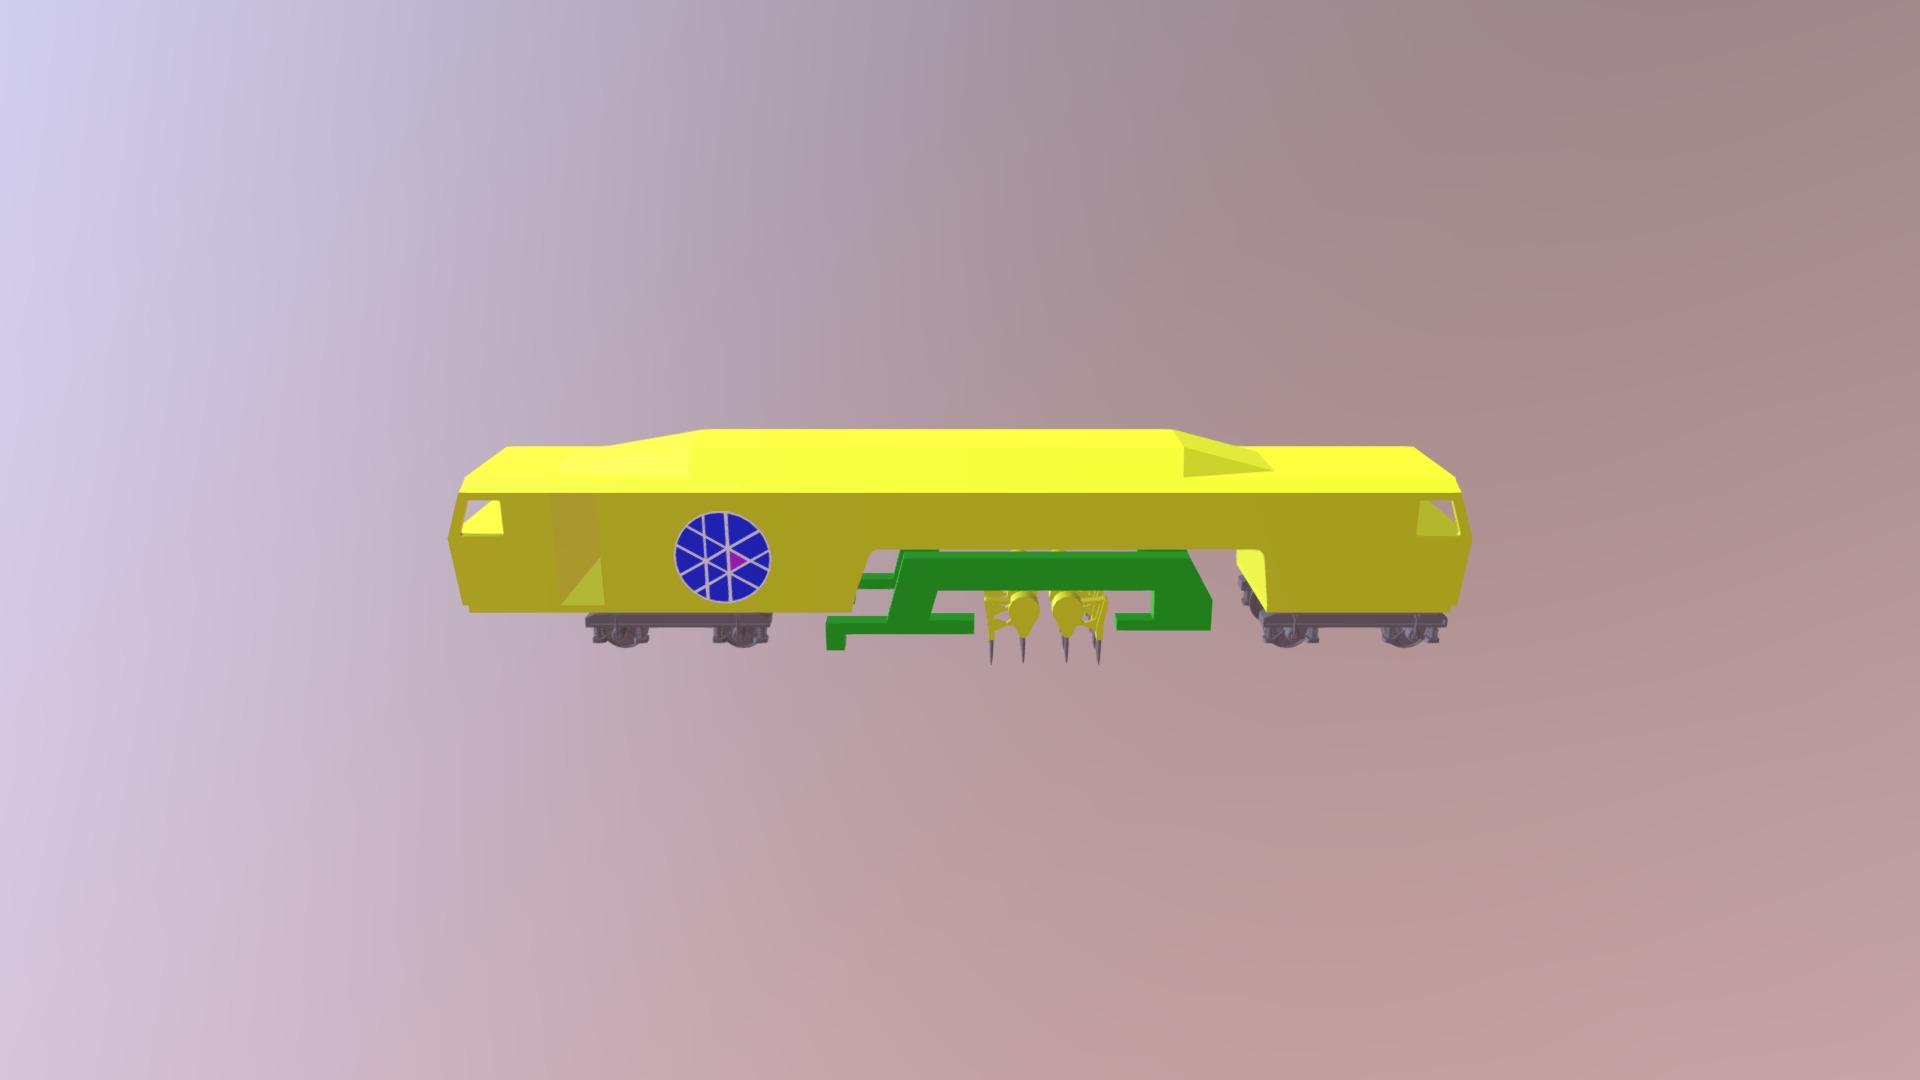 3D model Stopfmaschine - This is a 3D model of the Stopfmaschine. The 3D model is about a green and yellow object.